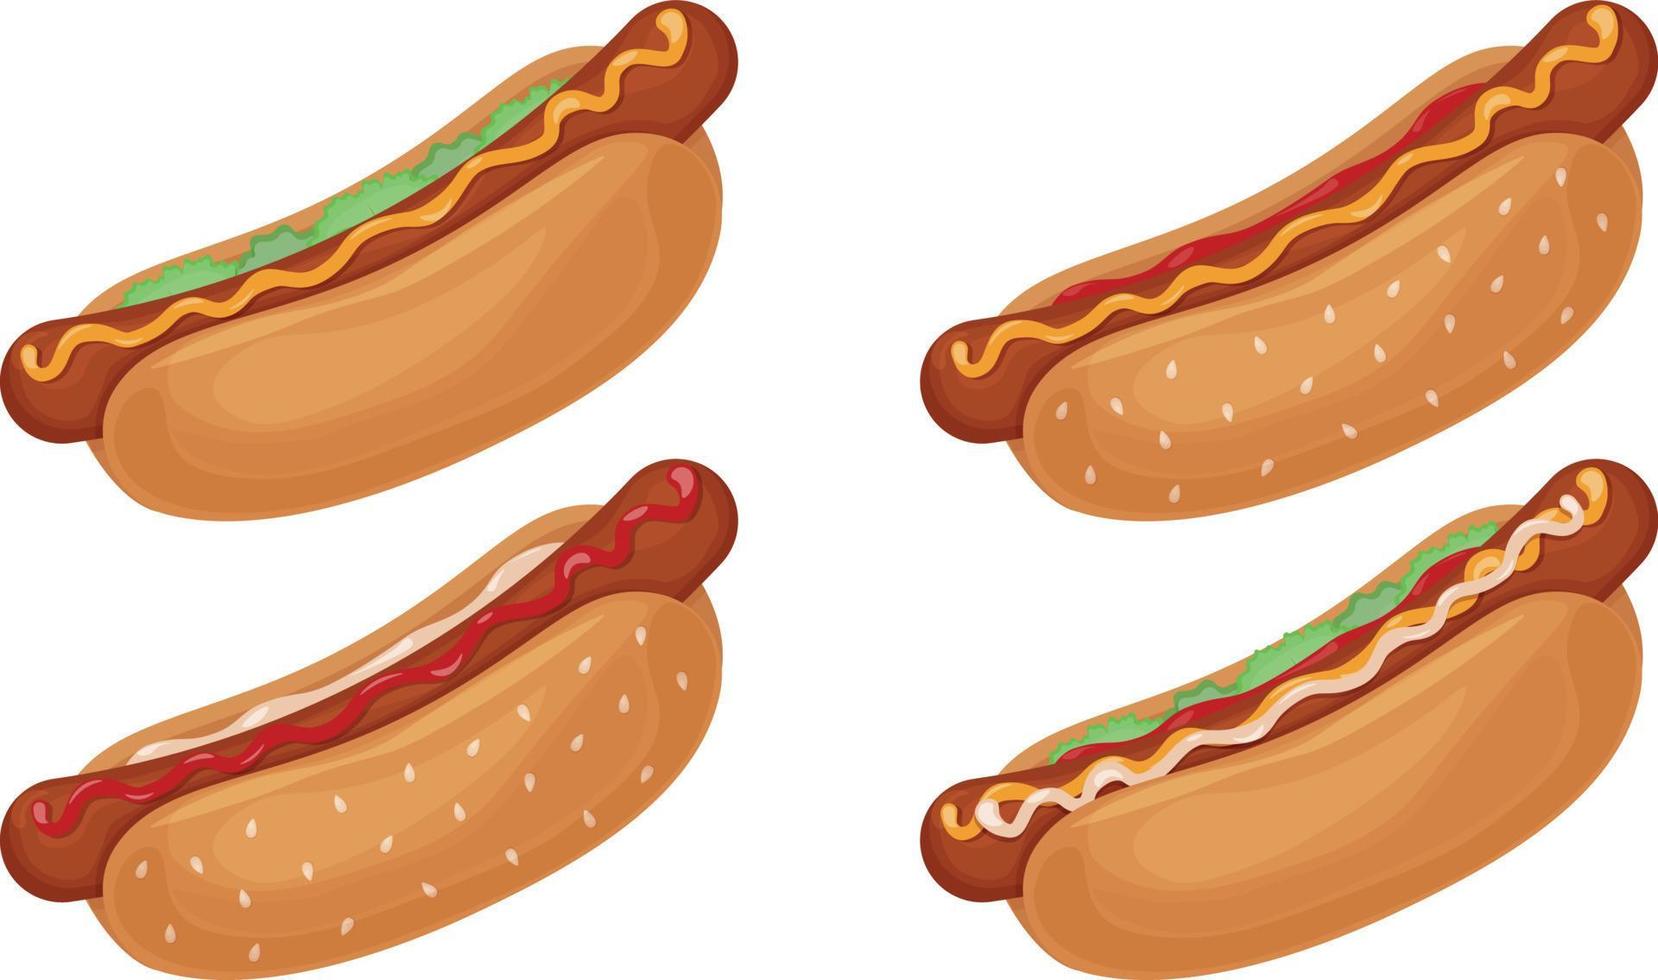 An appetizing set of four hot dogs. Delicious juicy hot dogs with sausage, ketchup, mayonnaise, mustard and lettuce leaf. Fast food in cartoon style. Vector illustration on a white background